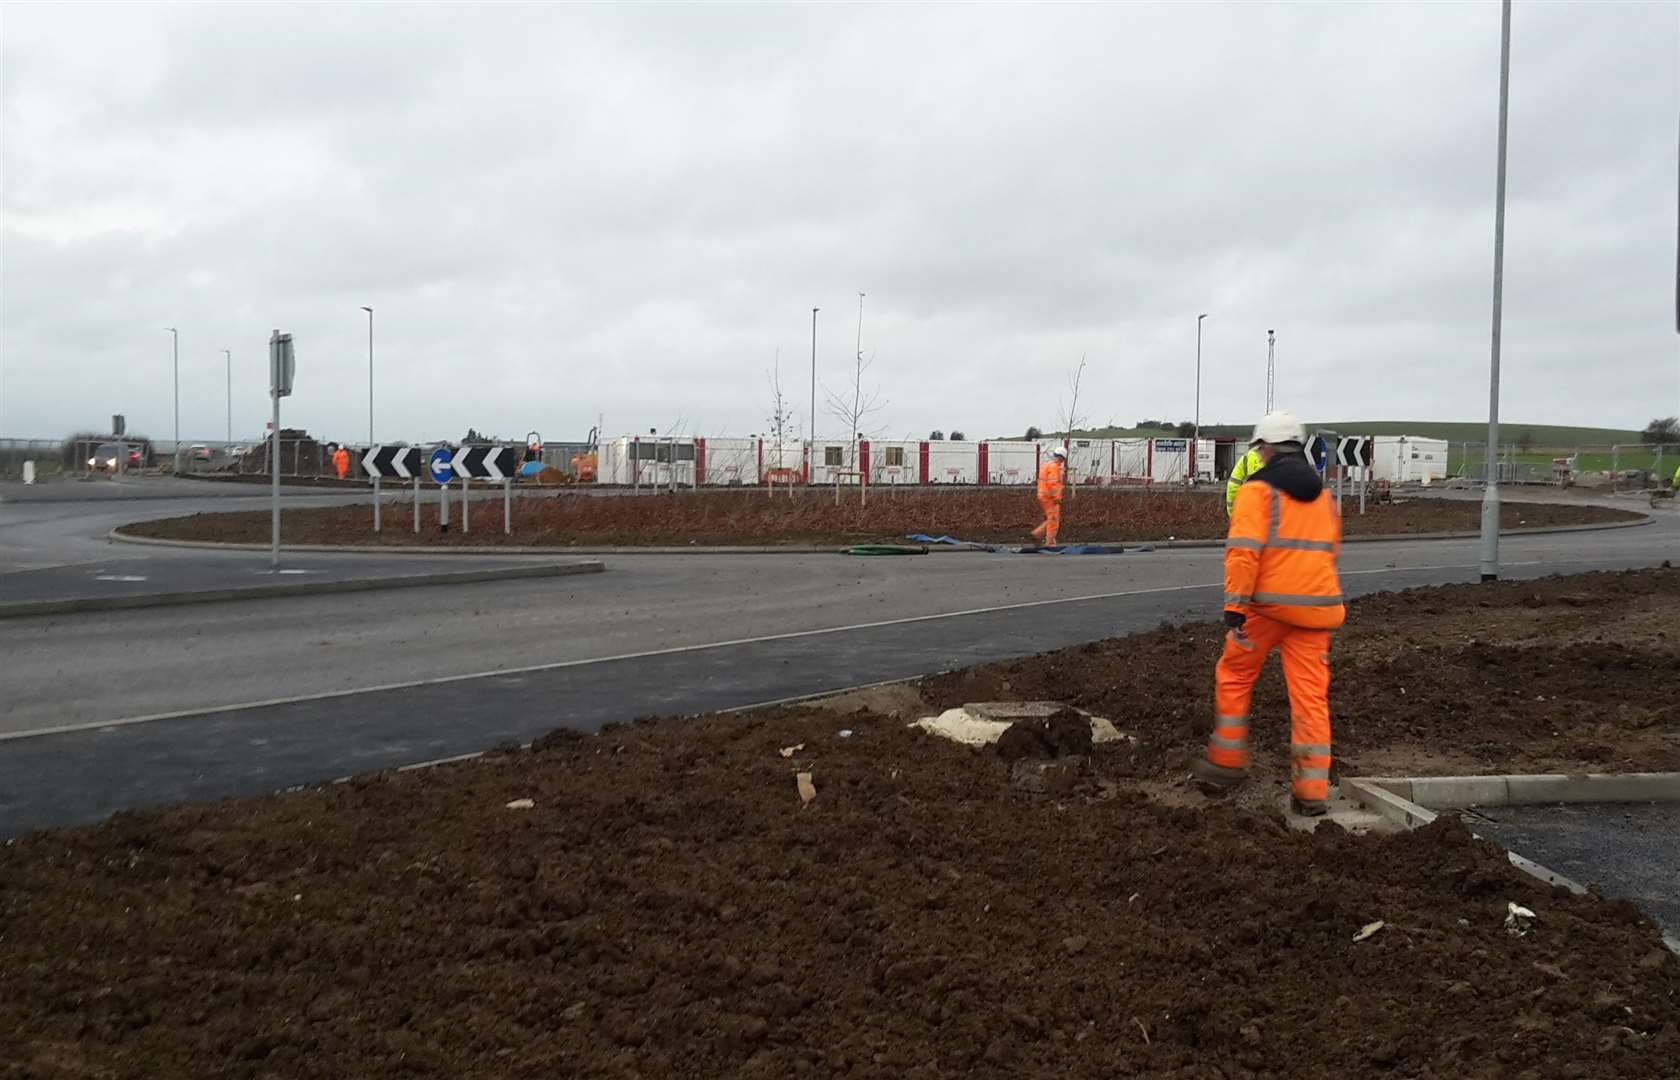 The roundabout was opened for the first time yesterday